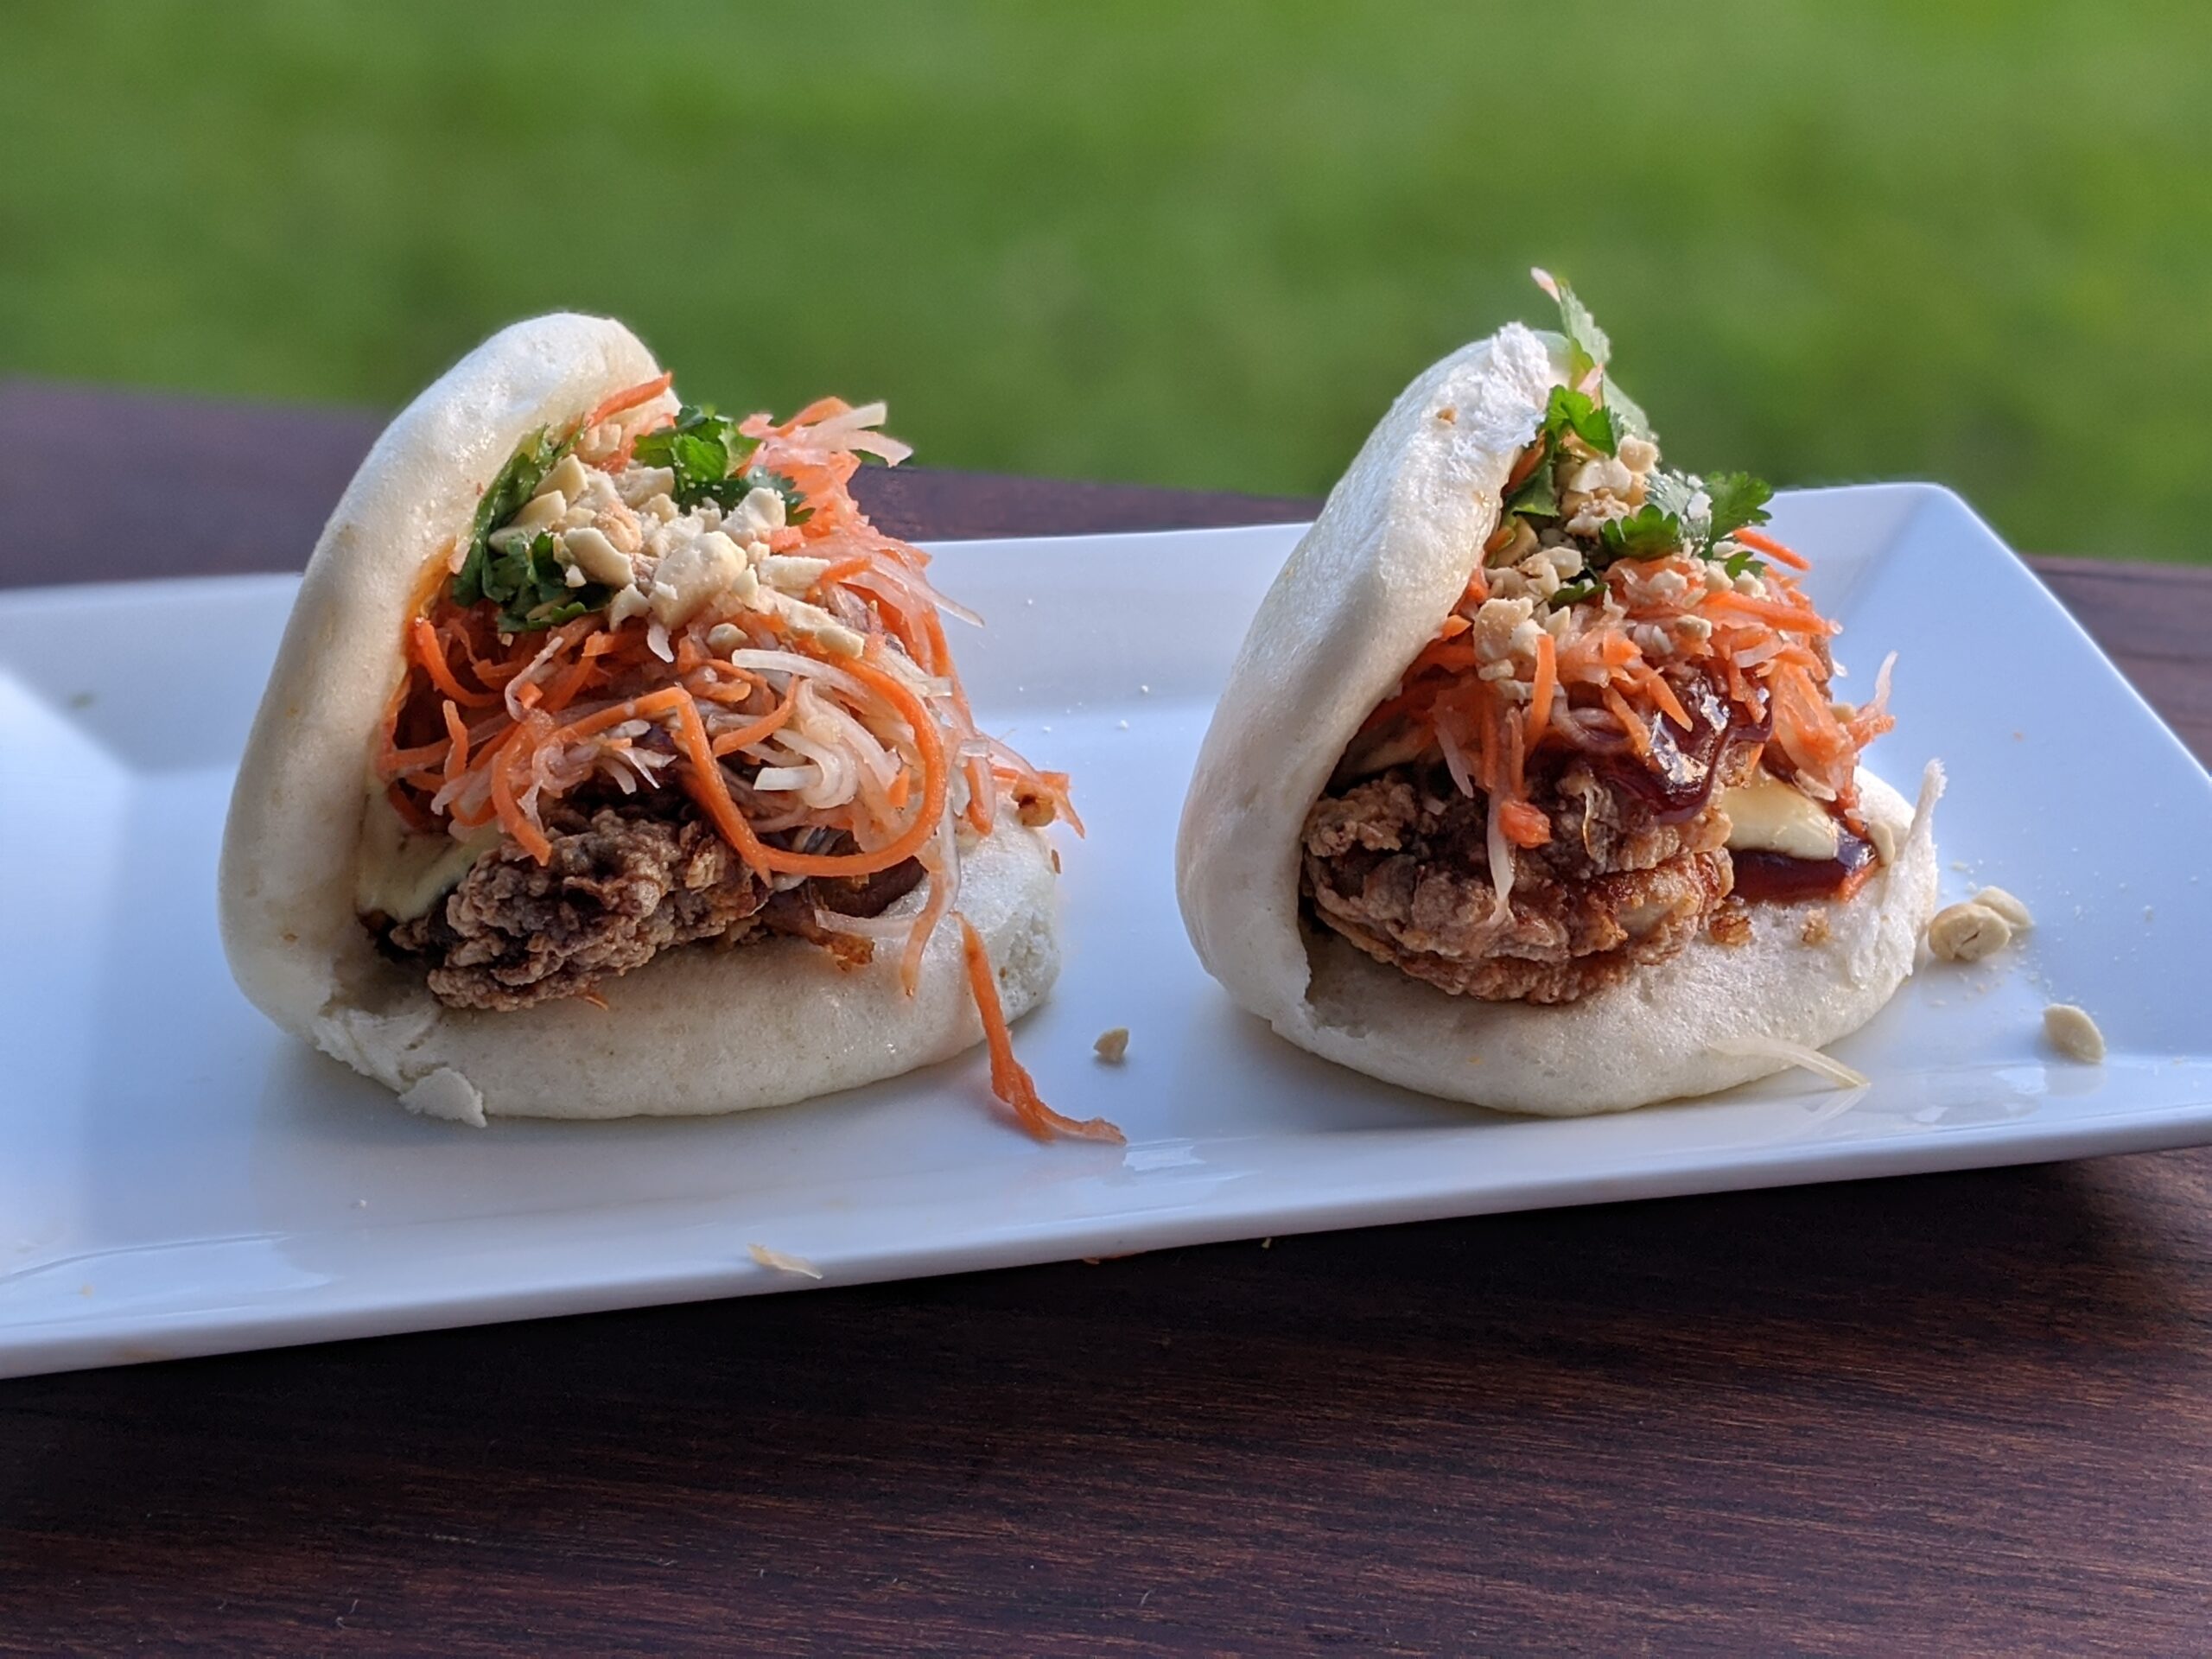 Fried chicken baos at AMA in Hanalei